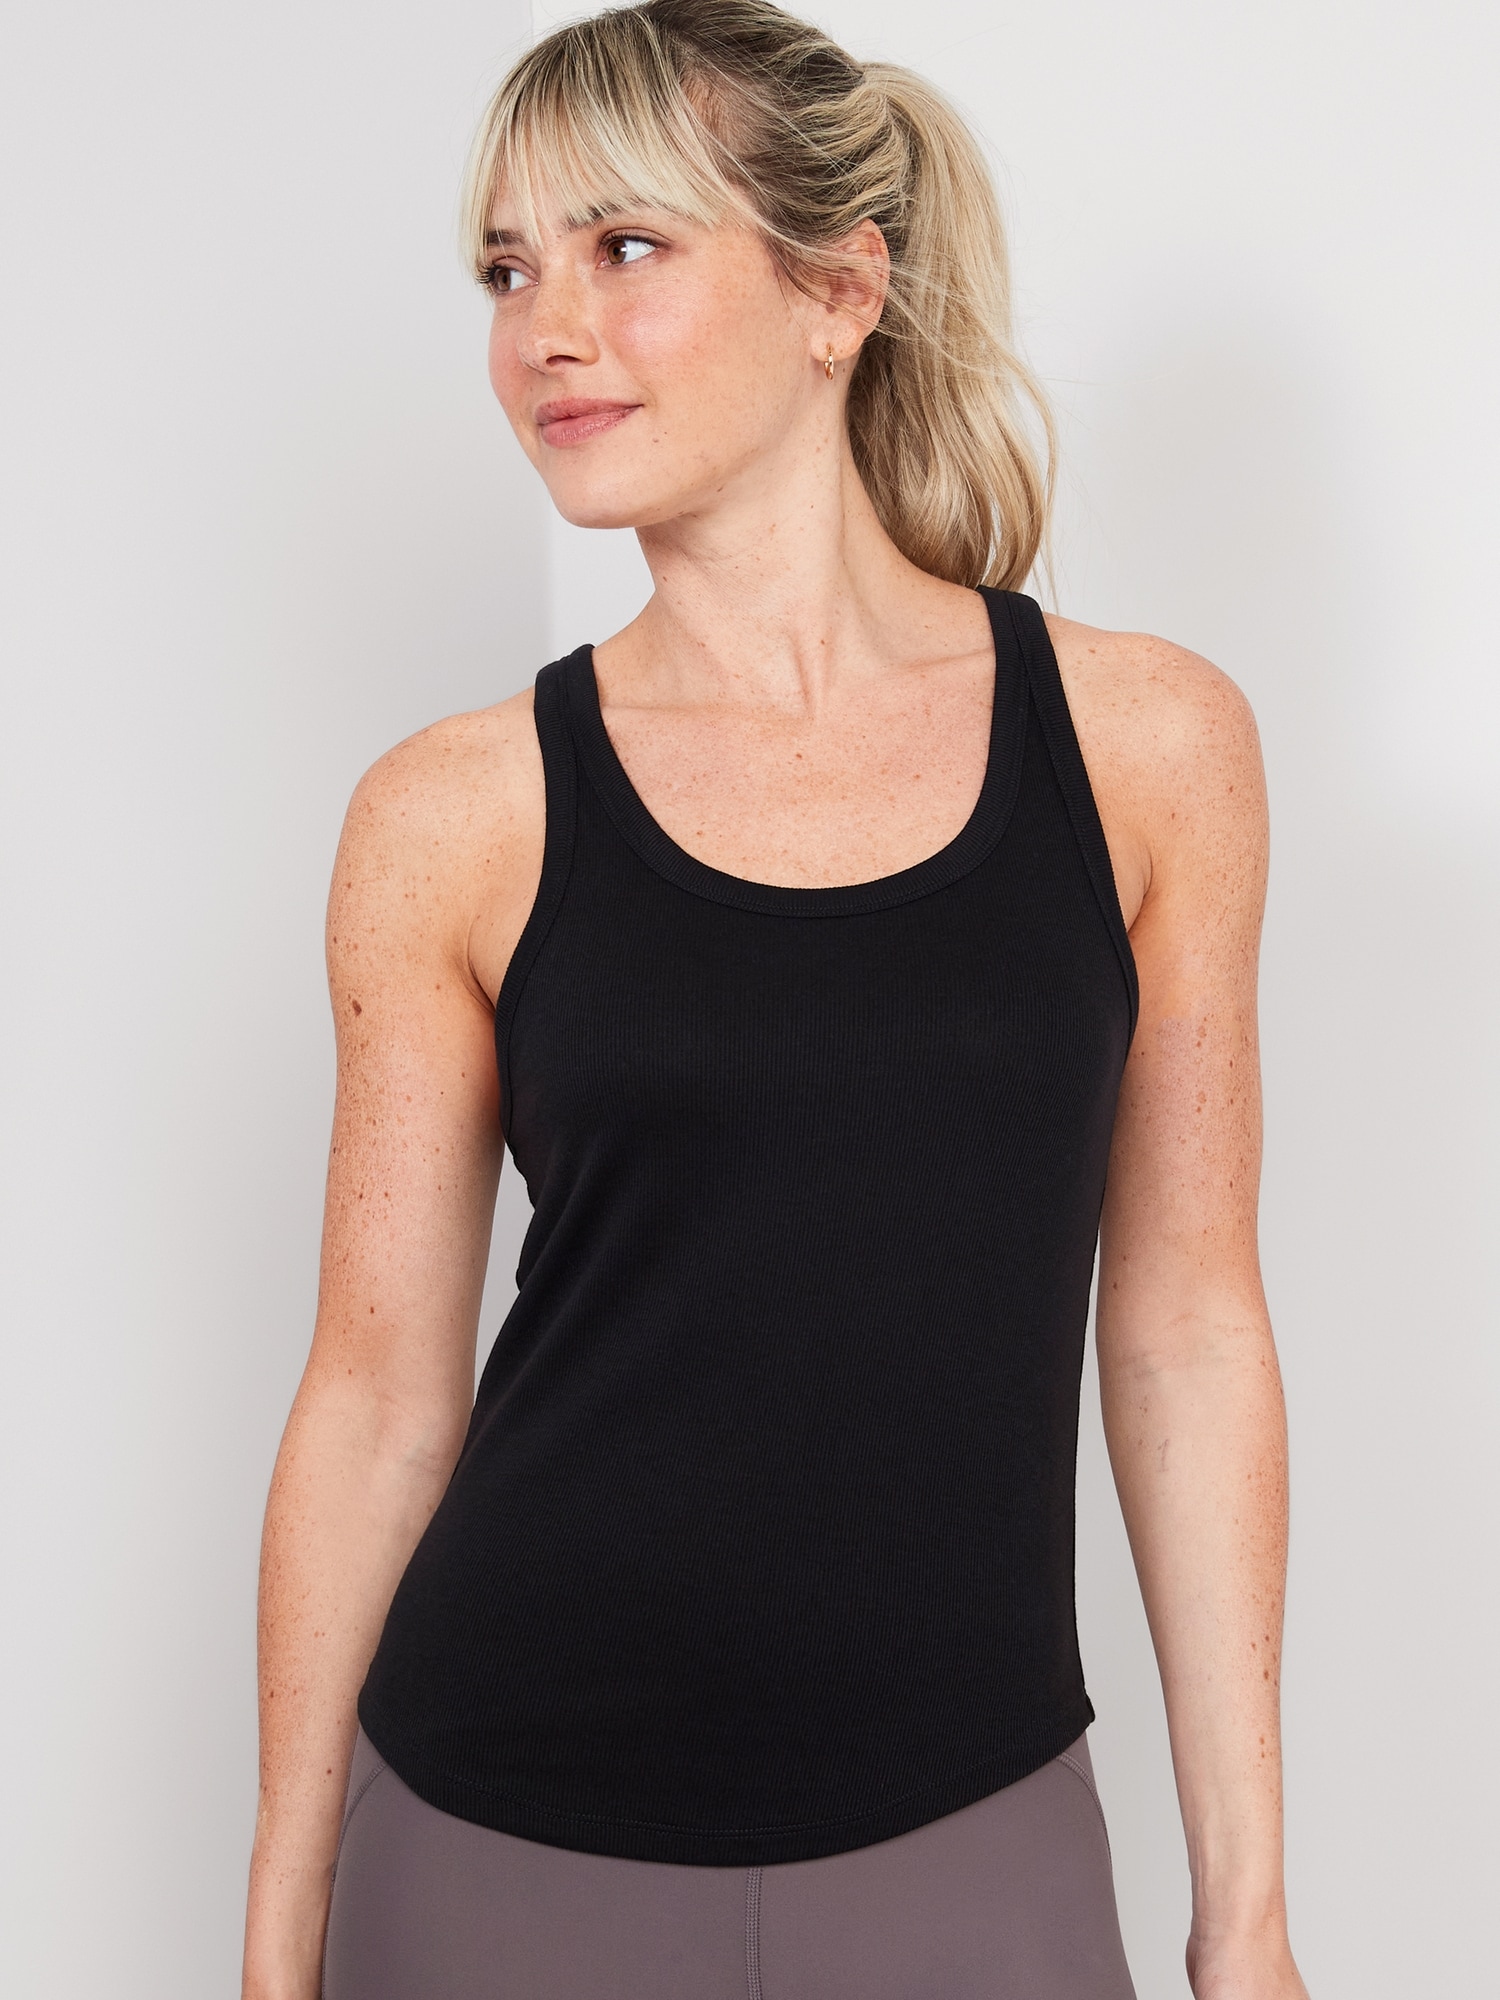 Women's Compression Tank Tops